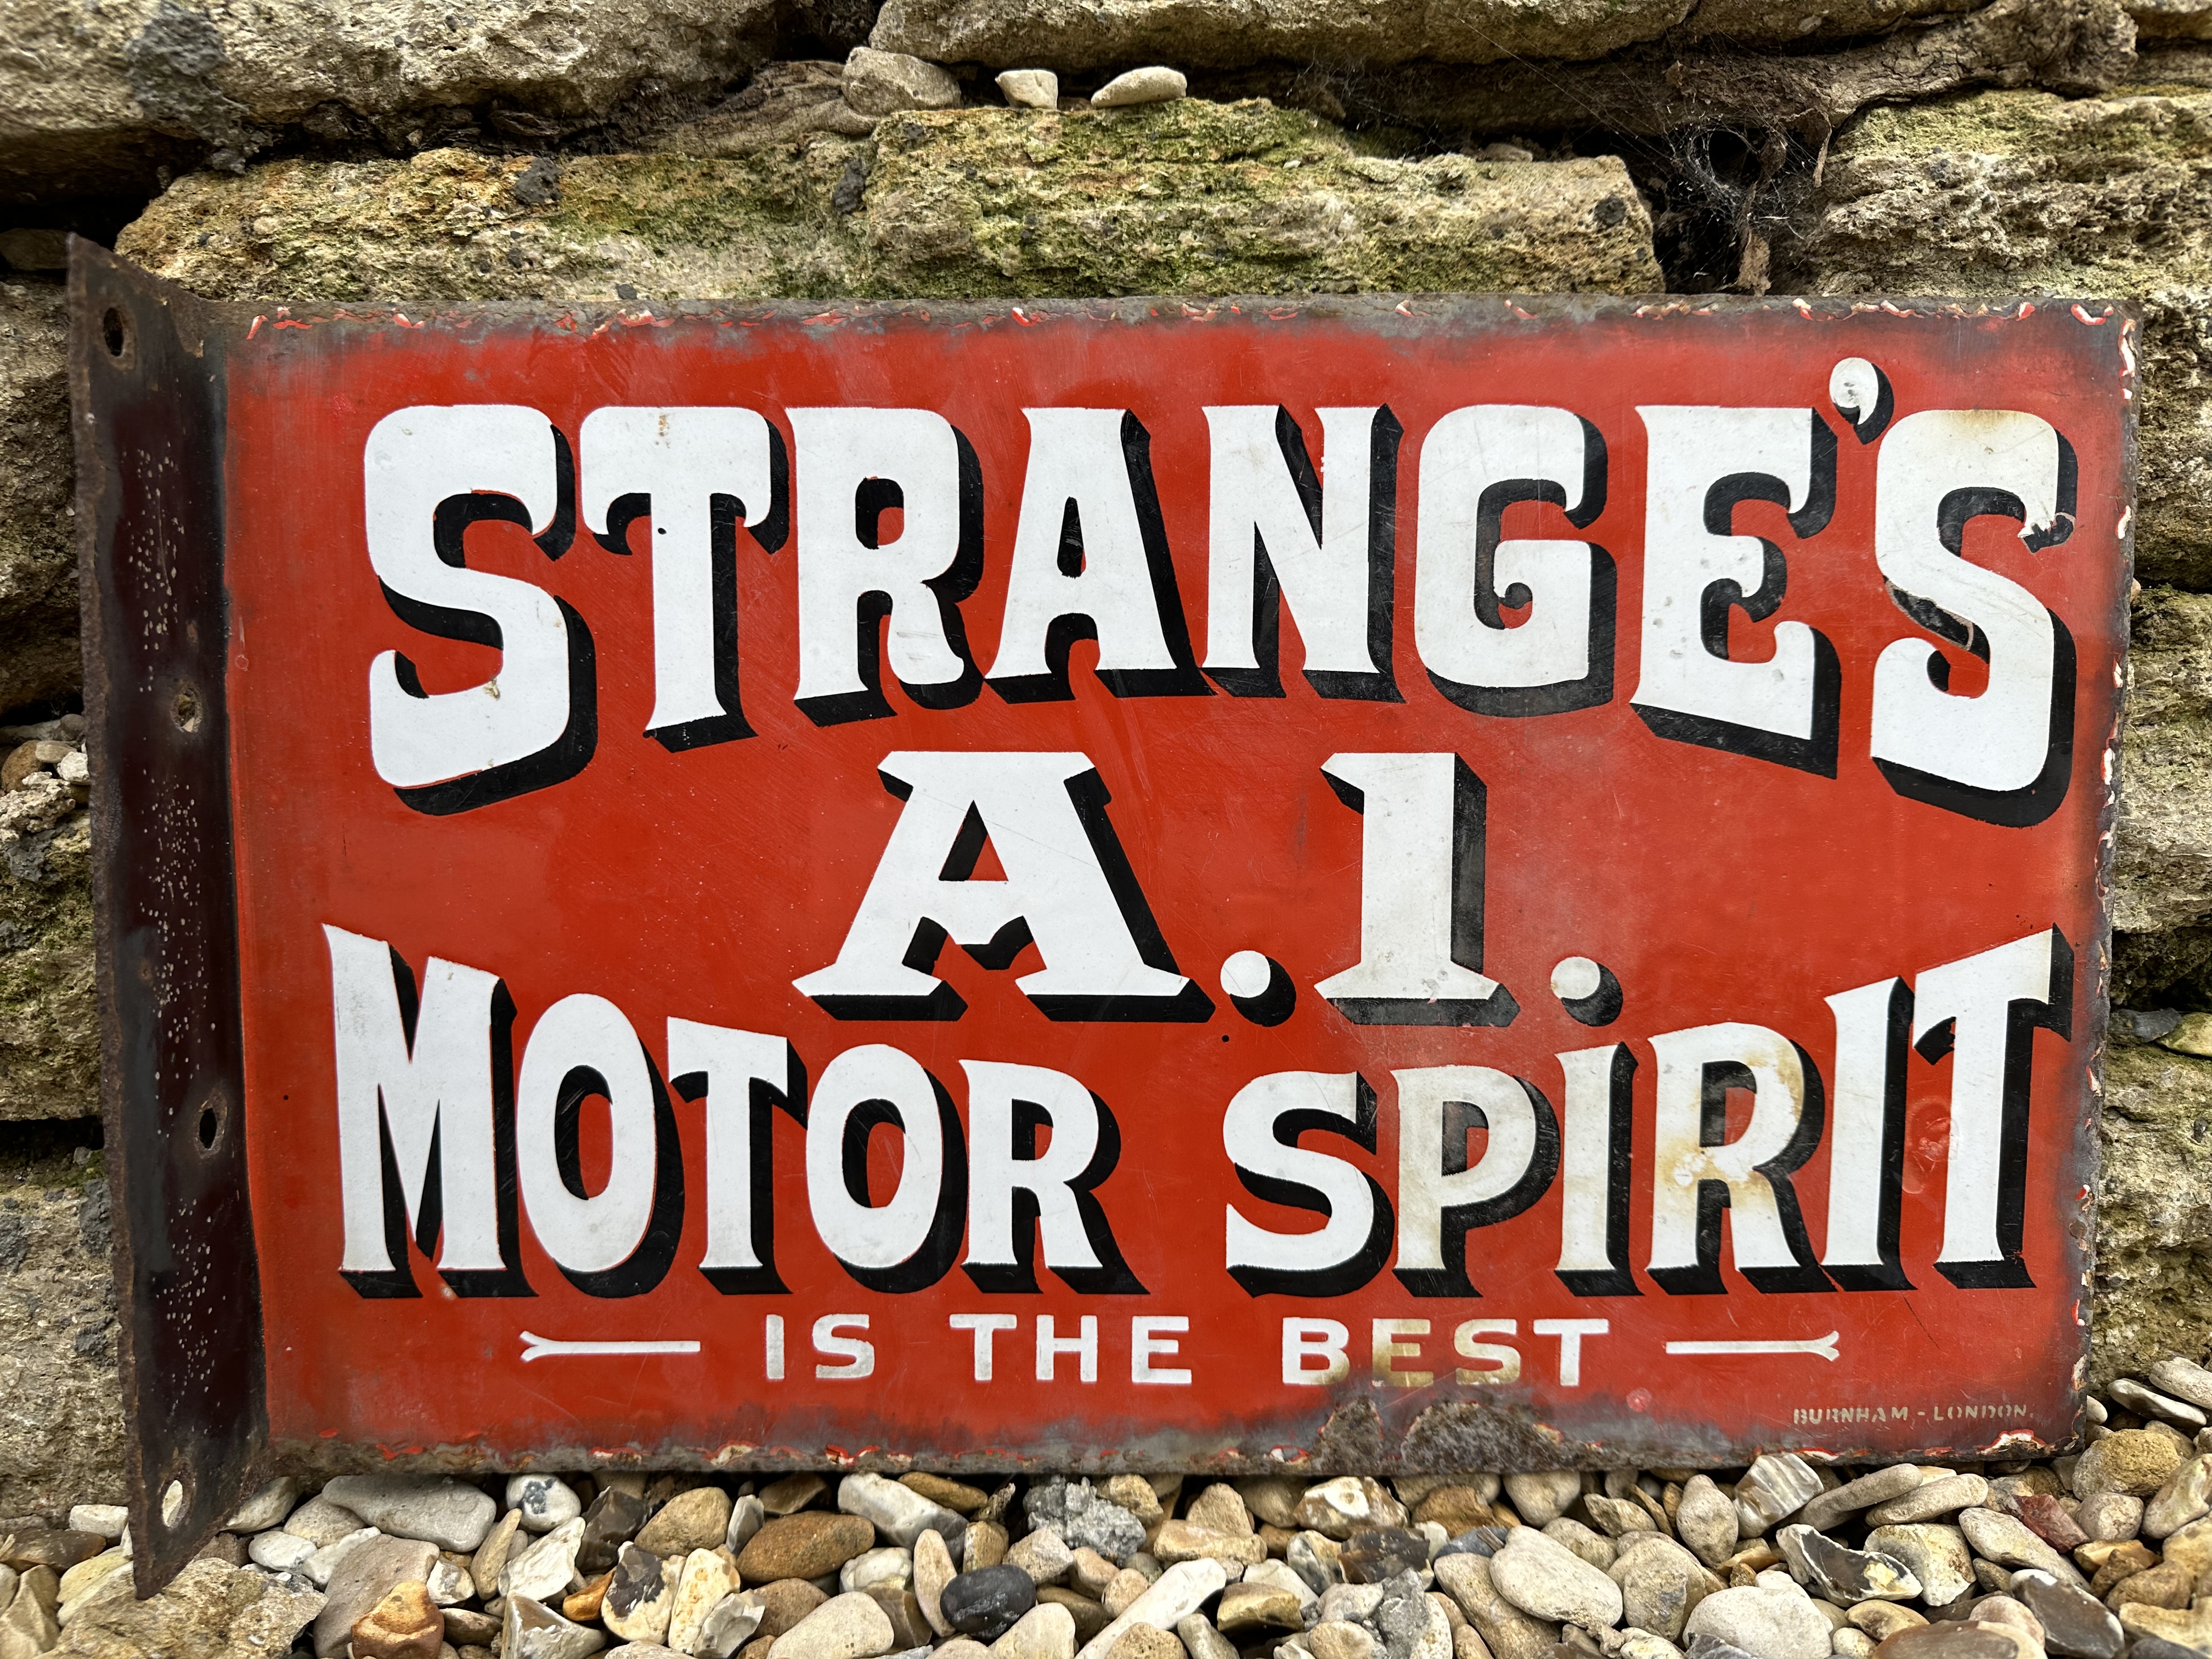 A rare Strange's A1 Motor Spirit 'Is the Best' double sided enamel sign with hanging flange, by